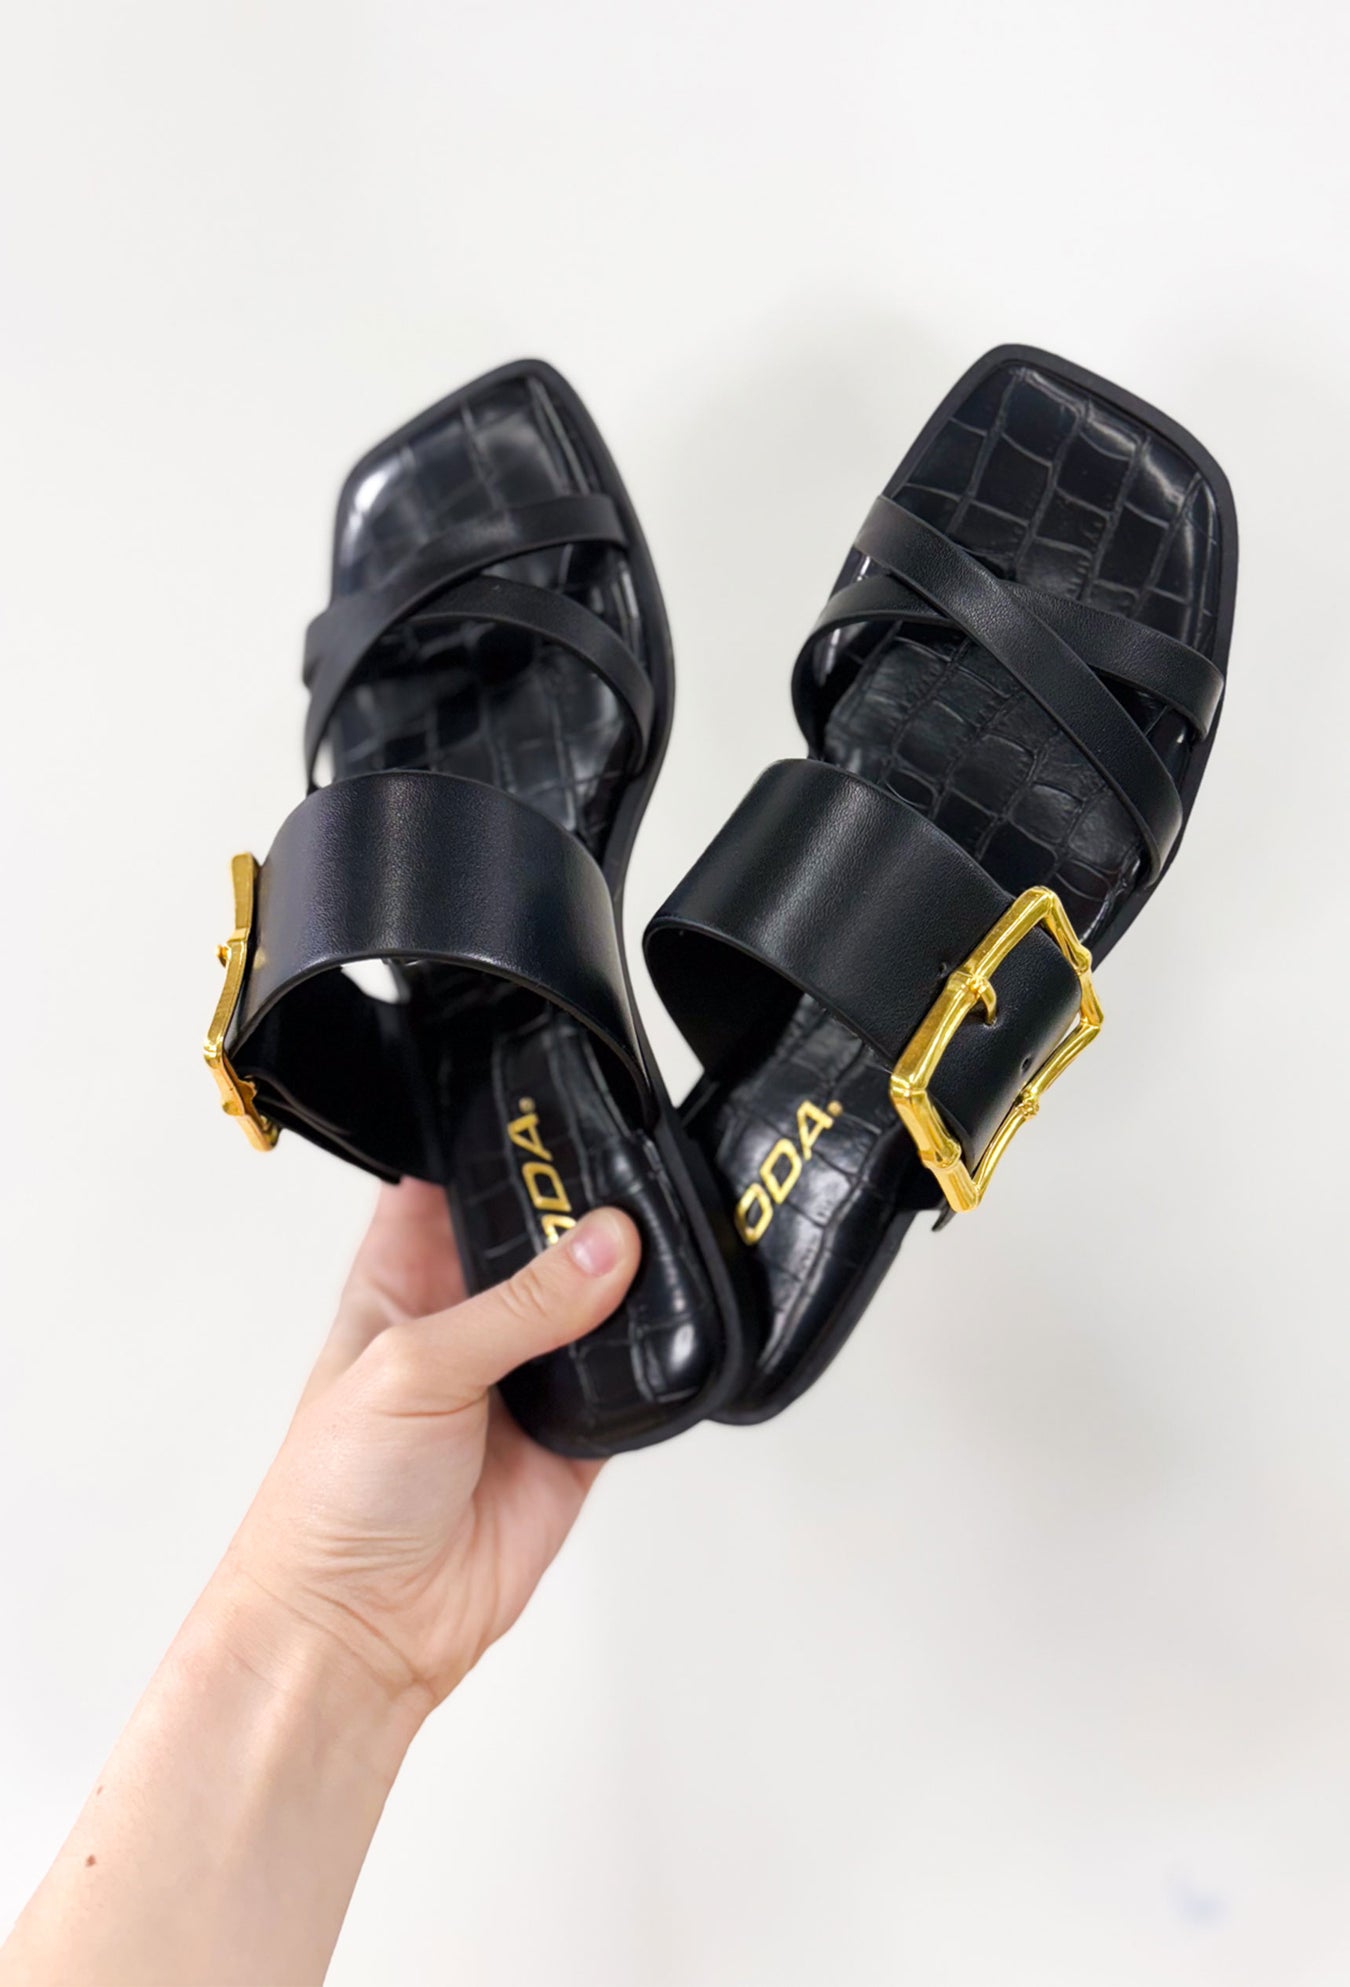 Flaxen Sandals in Black, flat sole faux leather strapped sandals with two small straps over the toes and one big strap over the top of the foot with a gold bamboo buckle